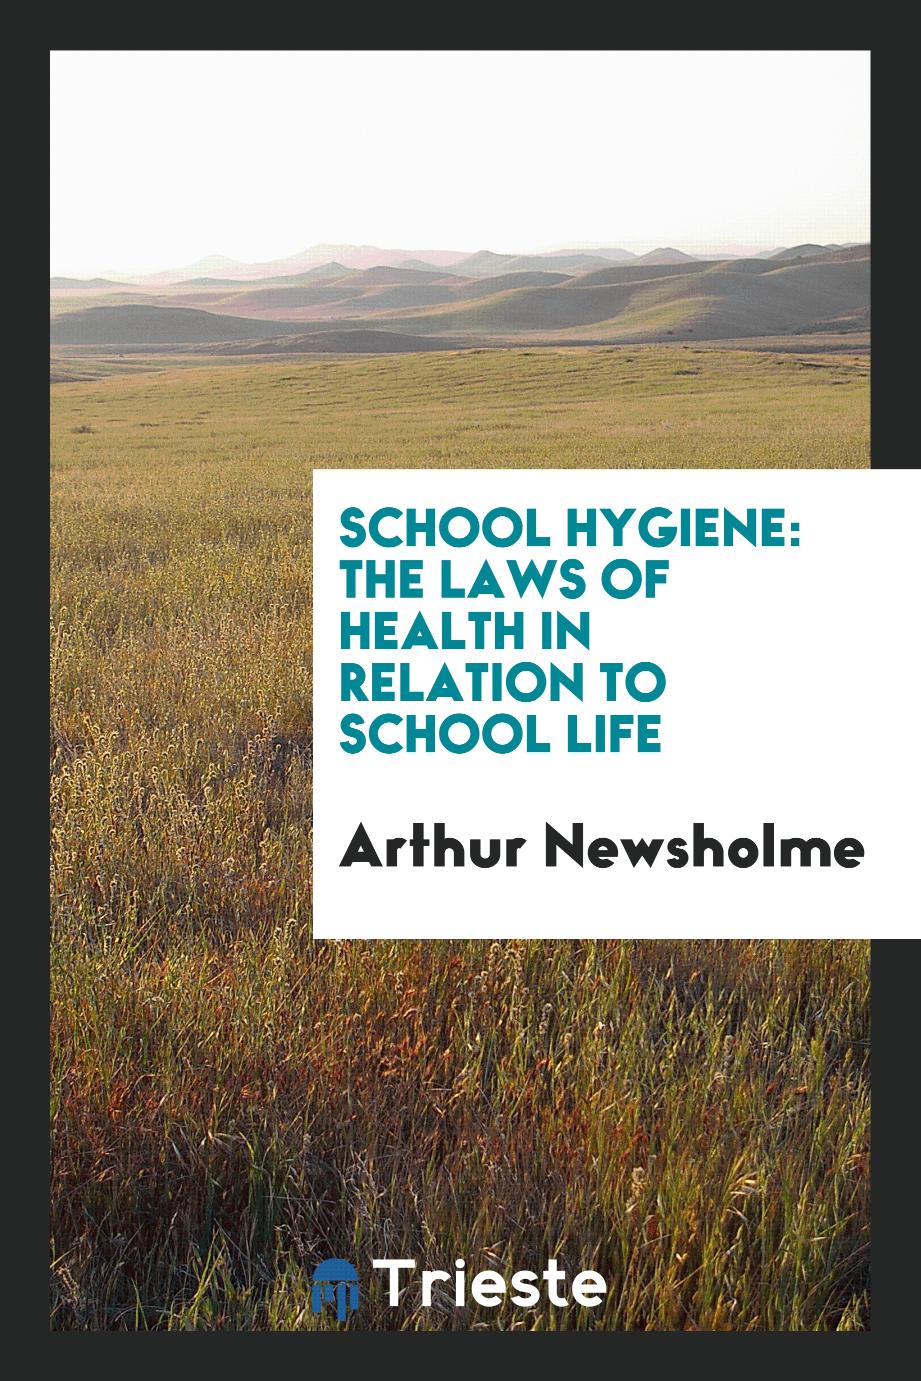 School Hygiene: The Laws of Health in Relation to School Life